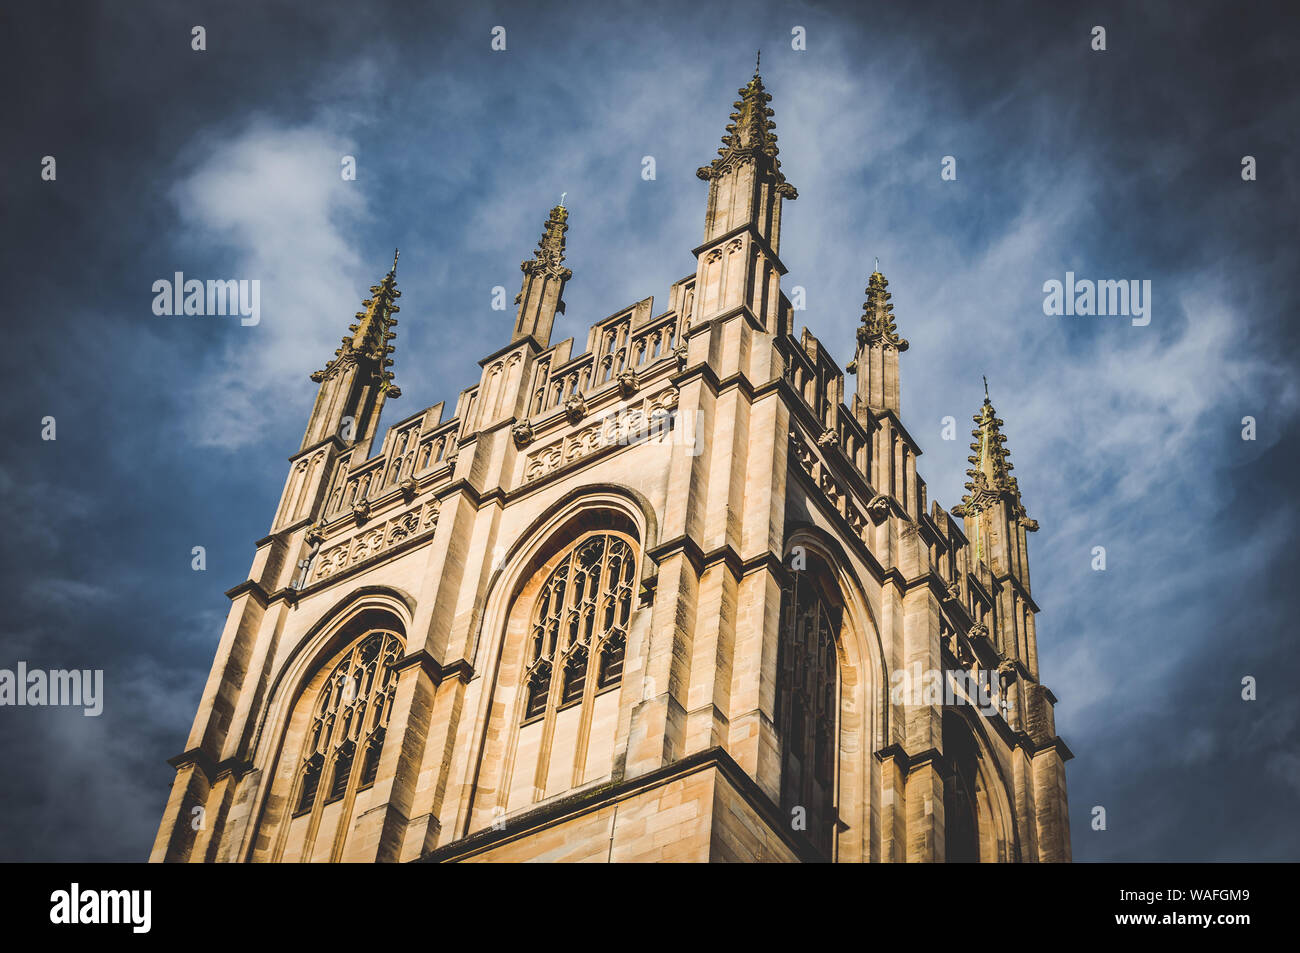 Magdalen College Tower, Oxford, England. 2017 Stock Photo